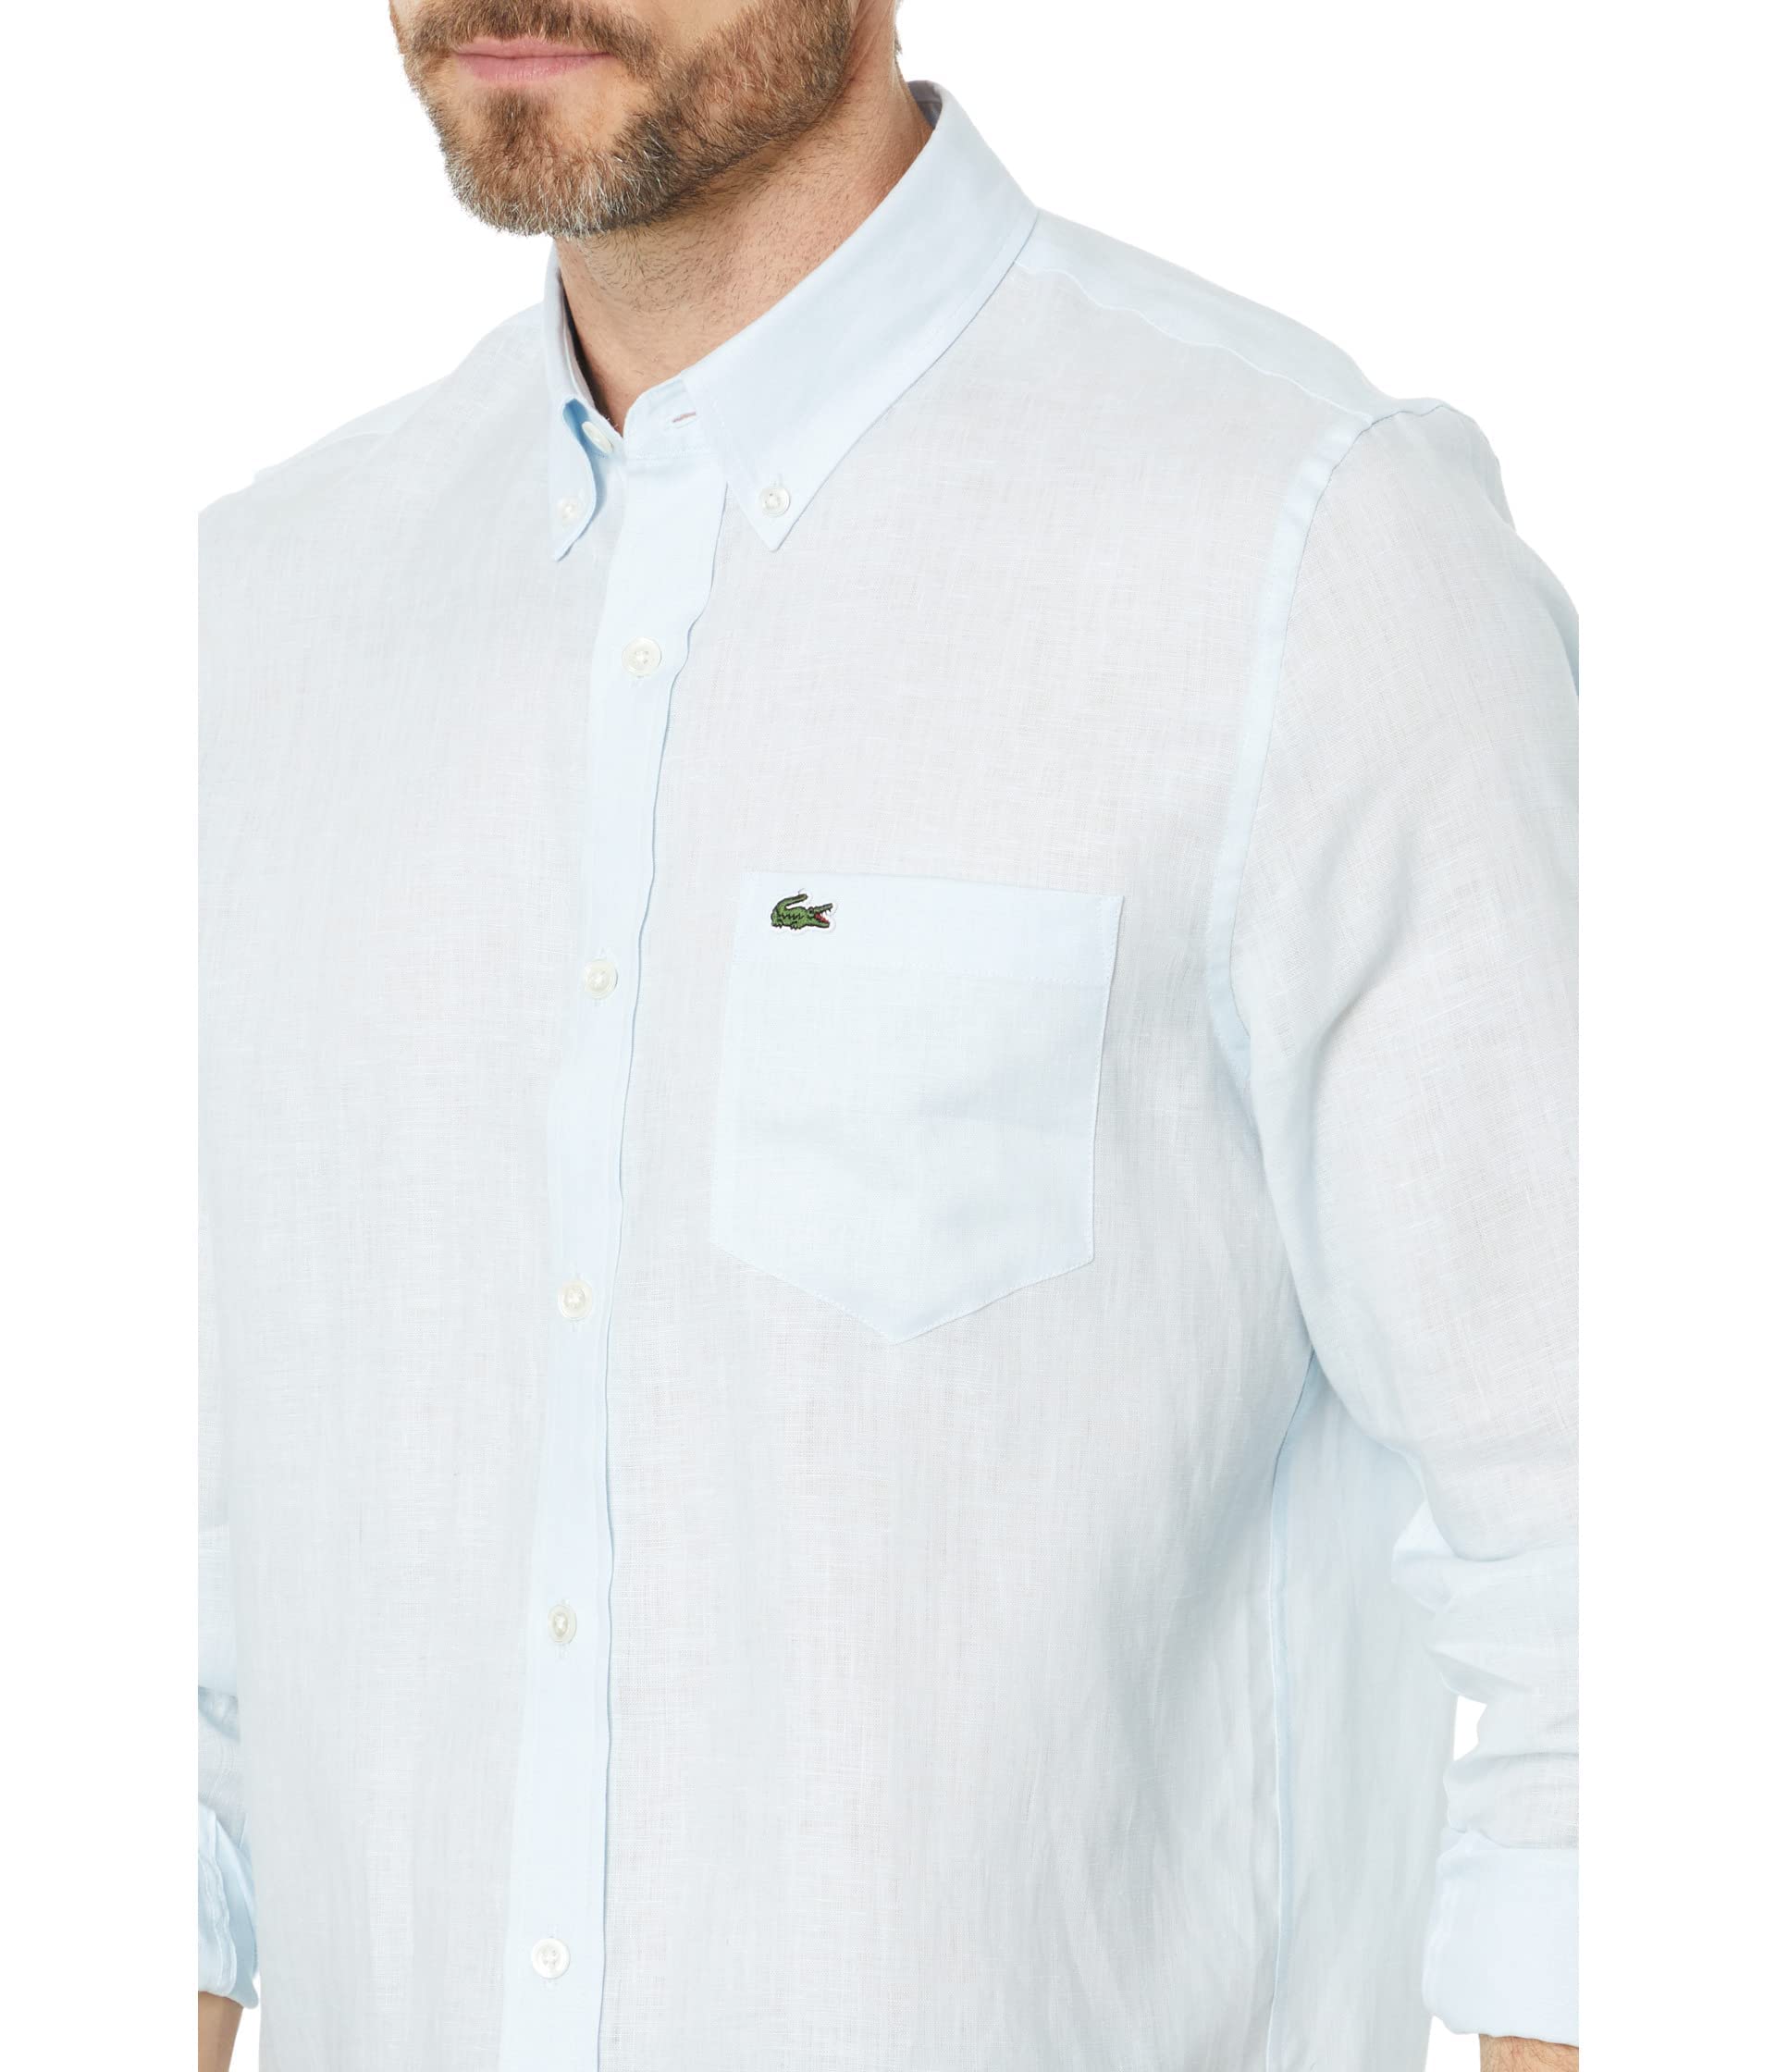 Lacoste Contemporary Collection's Men's Long Sleeve Regular Fit Linen Button Down with Front Pocket